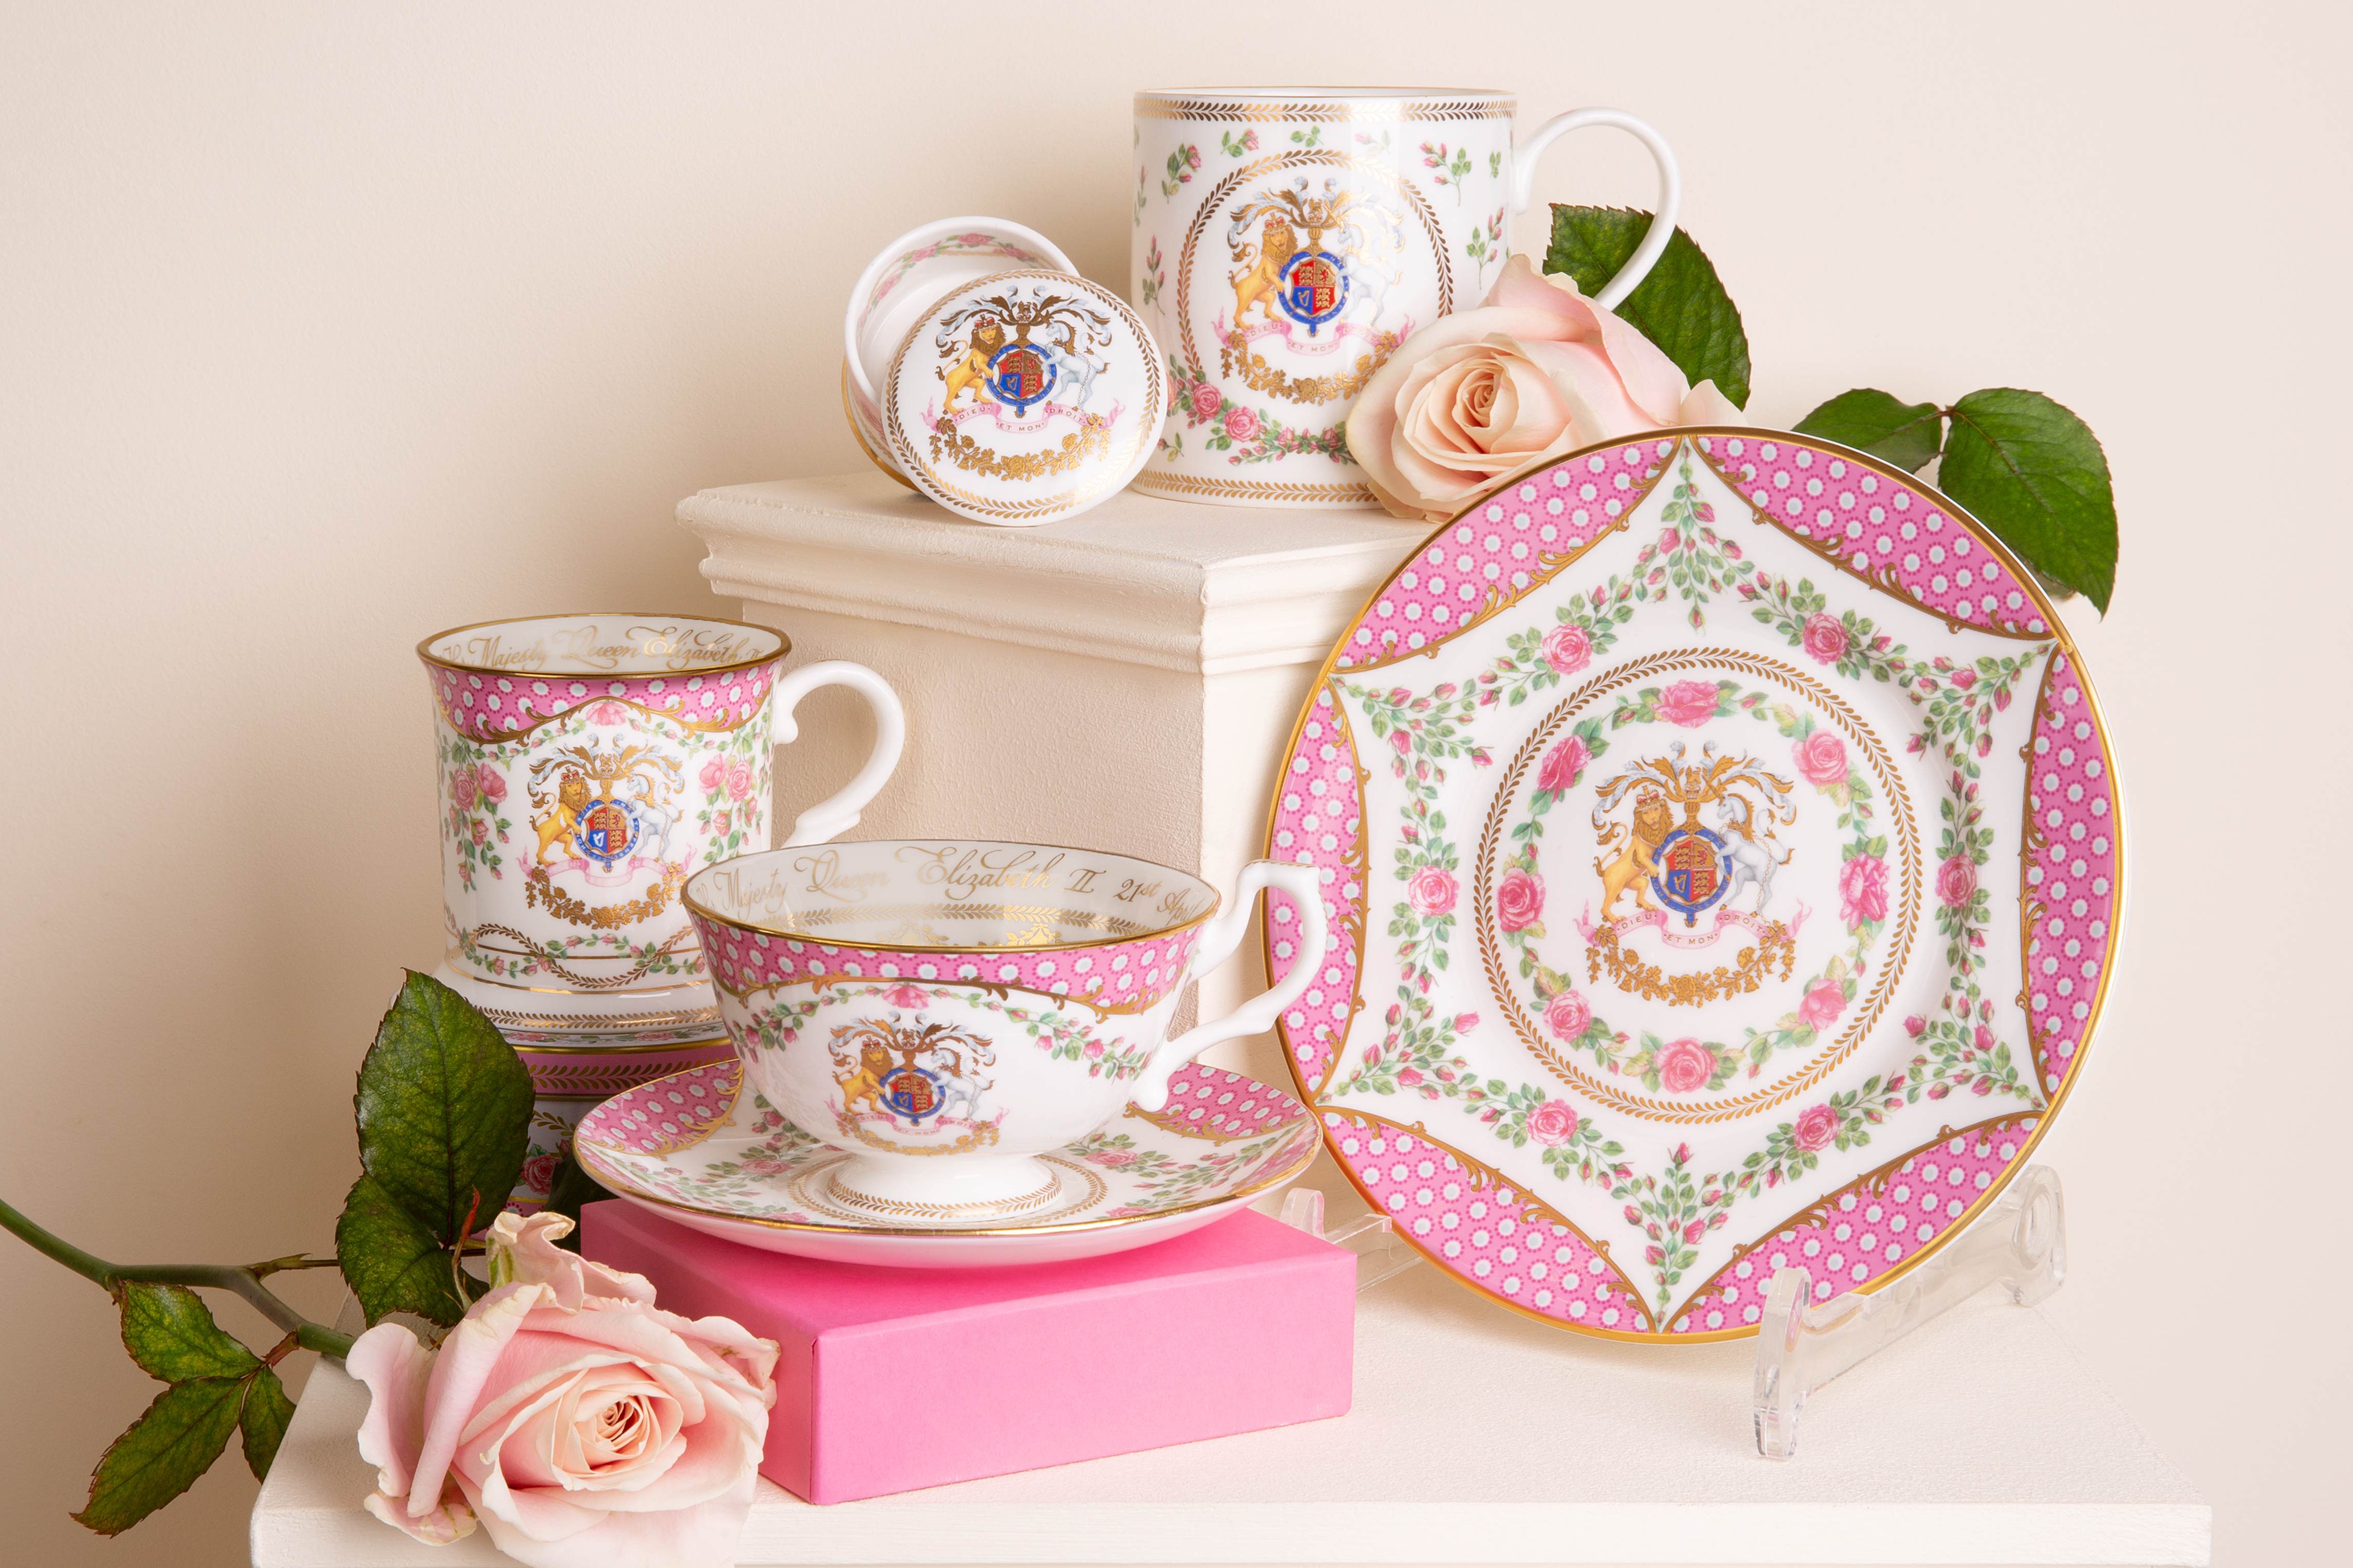 The Queen's 95th Birthday Collection